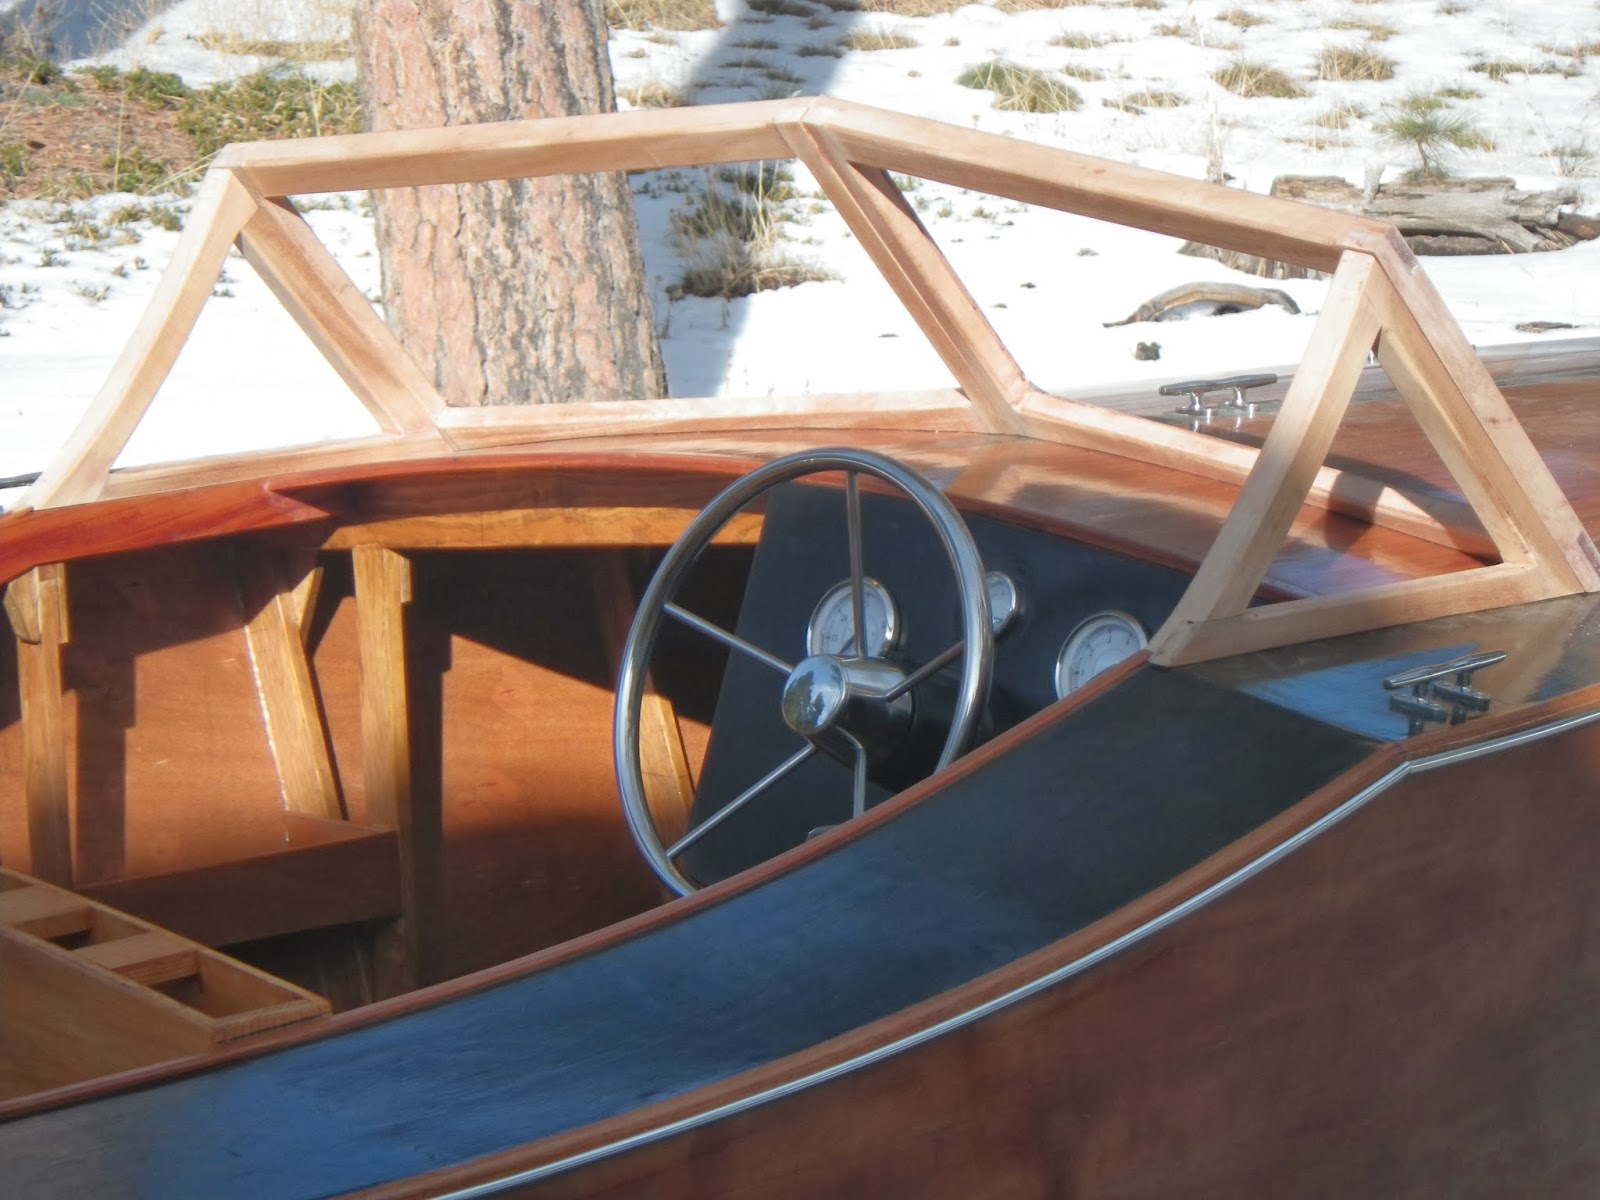 developable surface boat designs: pictures of boat windshield